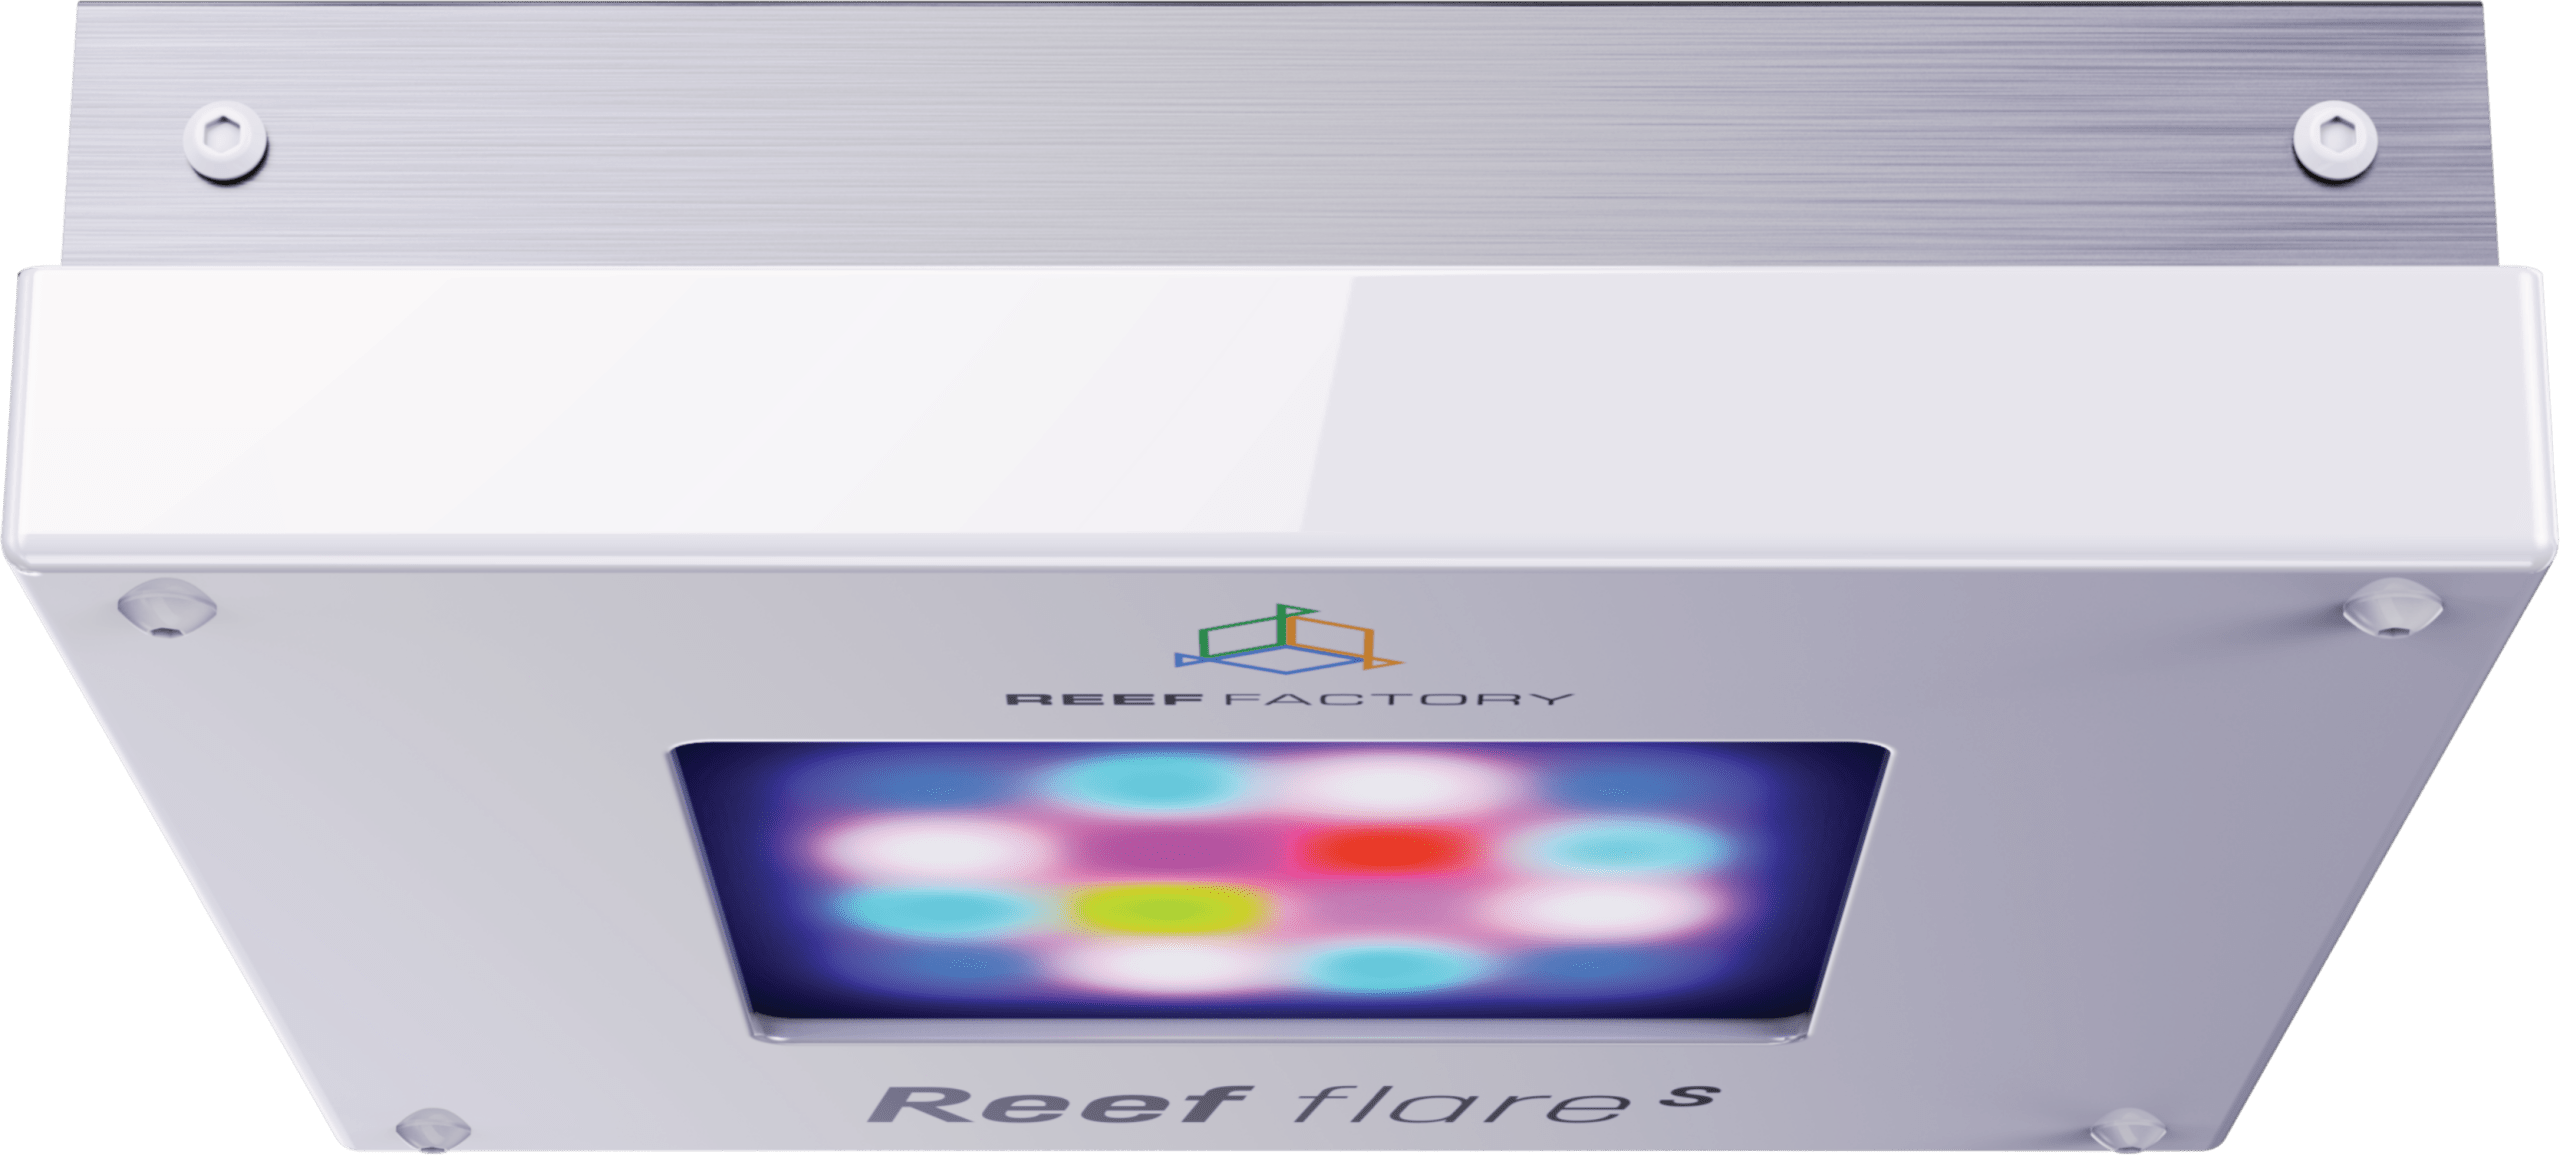 Reef Factory Reef flare Pro S